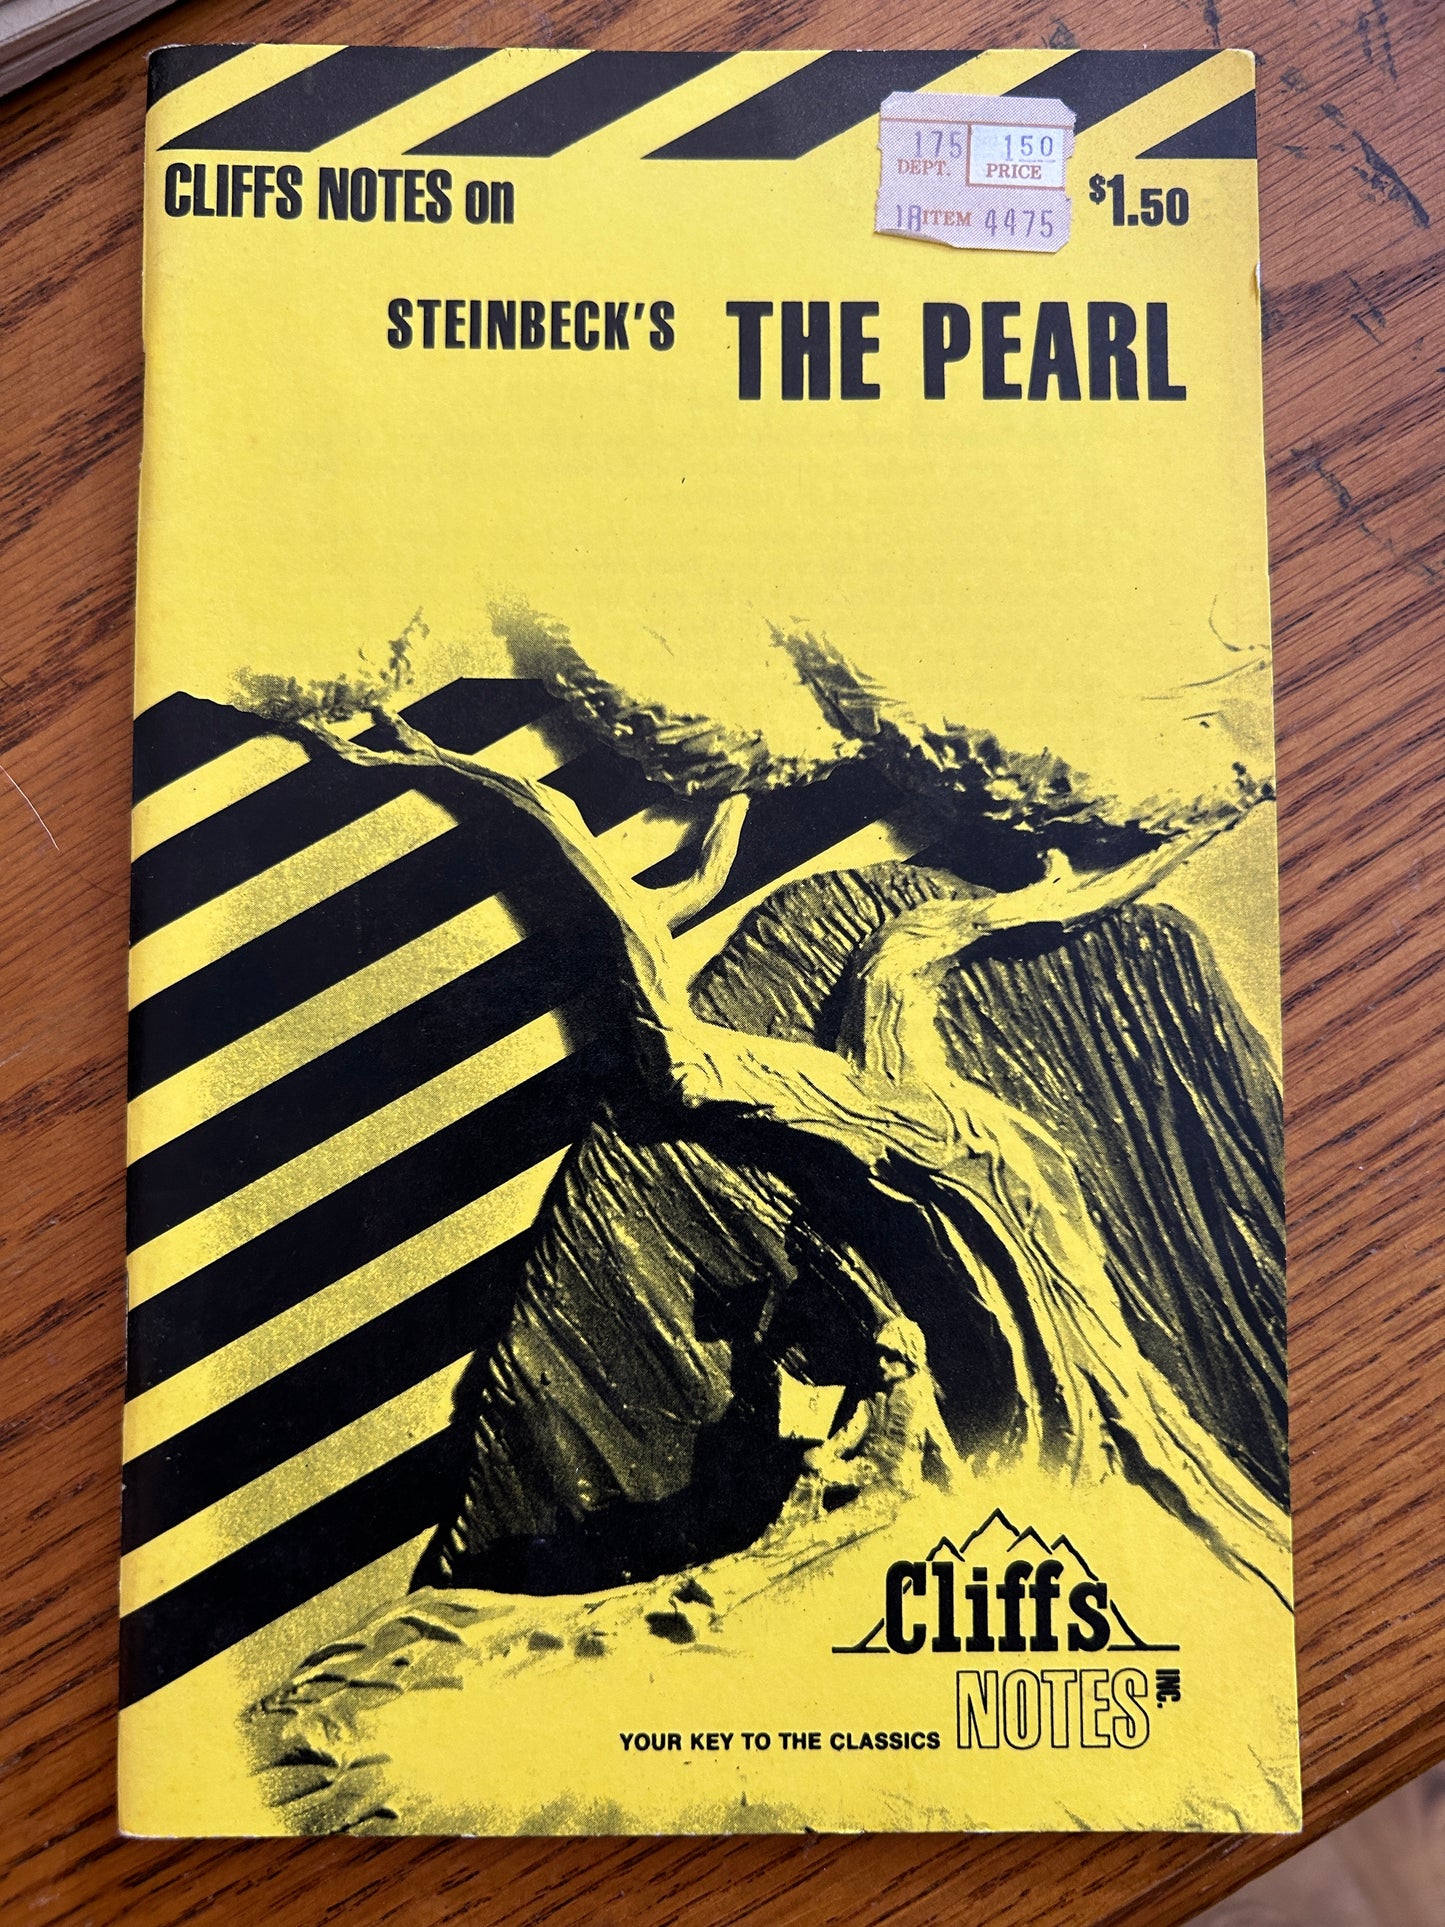 The Pearl (Cliffs Notes) (CliffsNotes on Literature) by Eva Fitzwater Ph.D (Author)